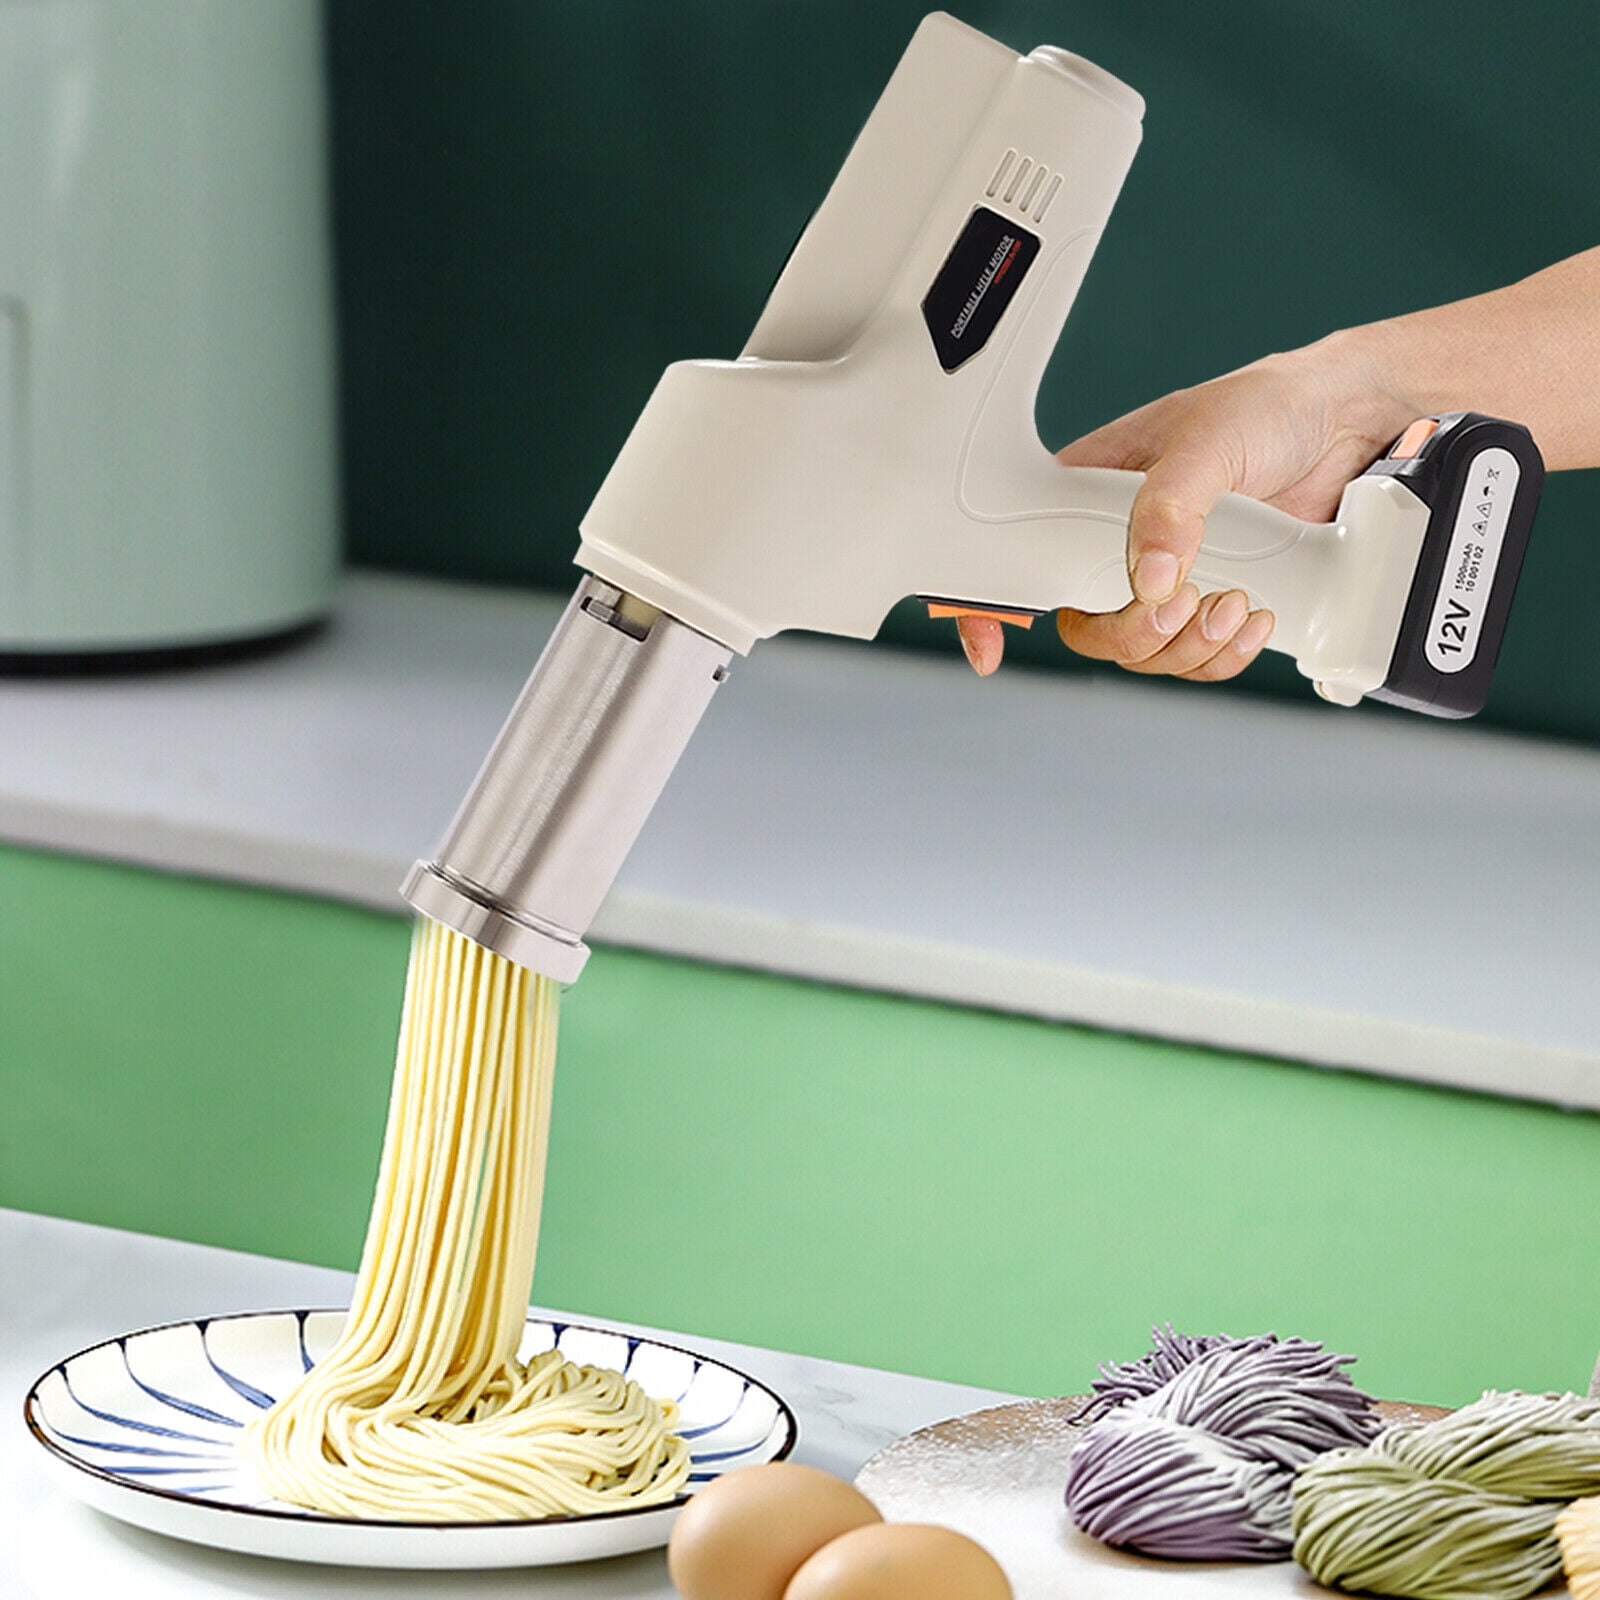 OUKANING Commercial Pasta Maker Machine Manual Noodle Making